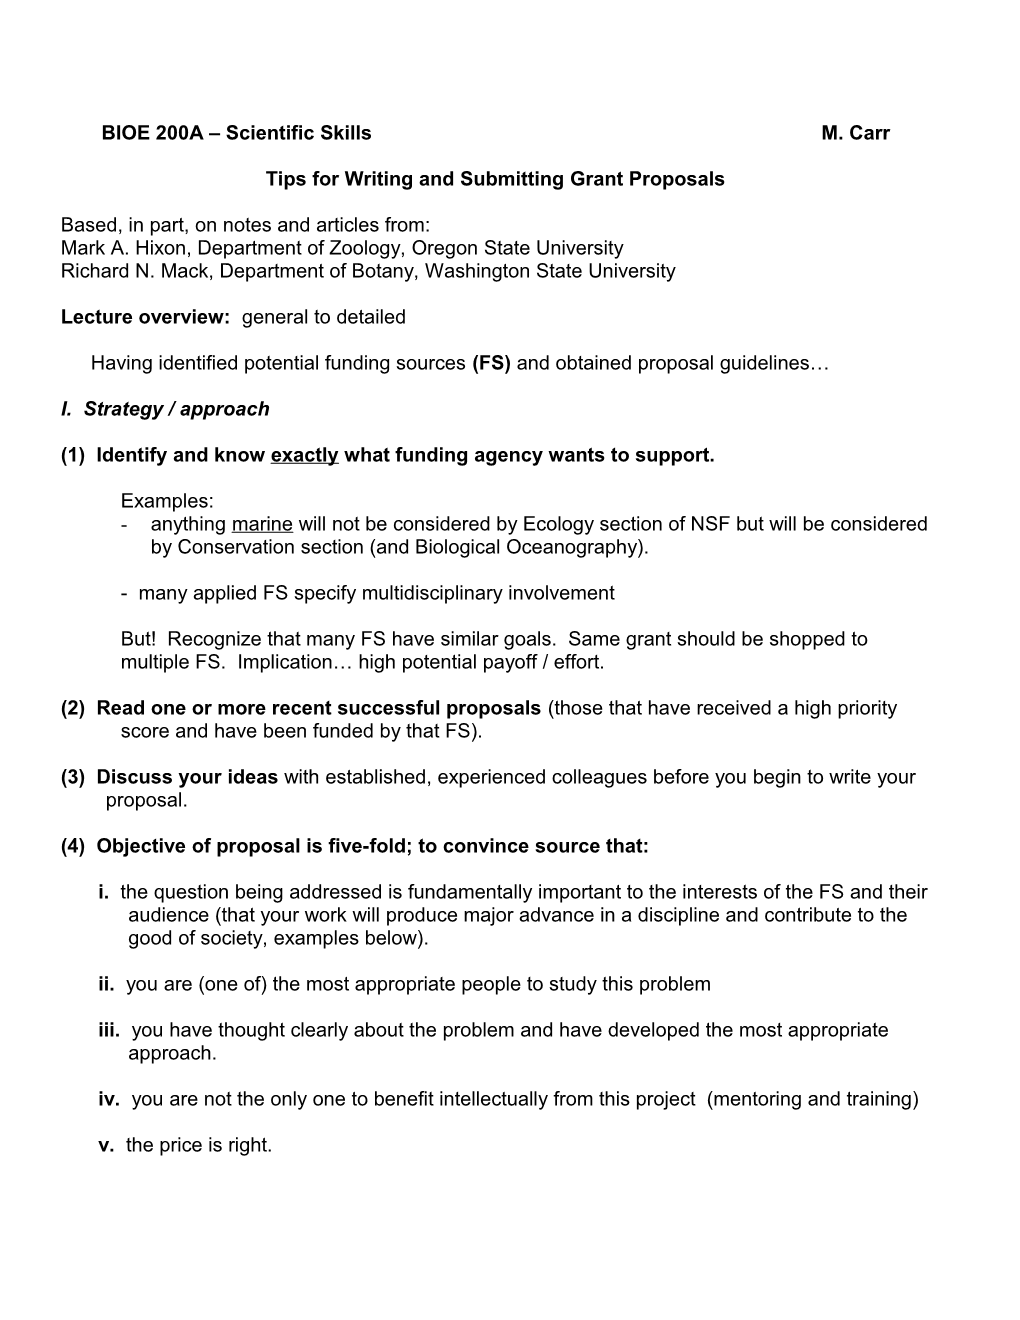 Tips for Writing and Submitting Grant Proposals